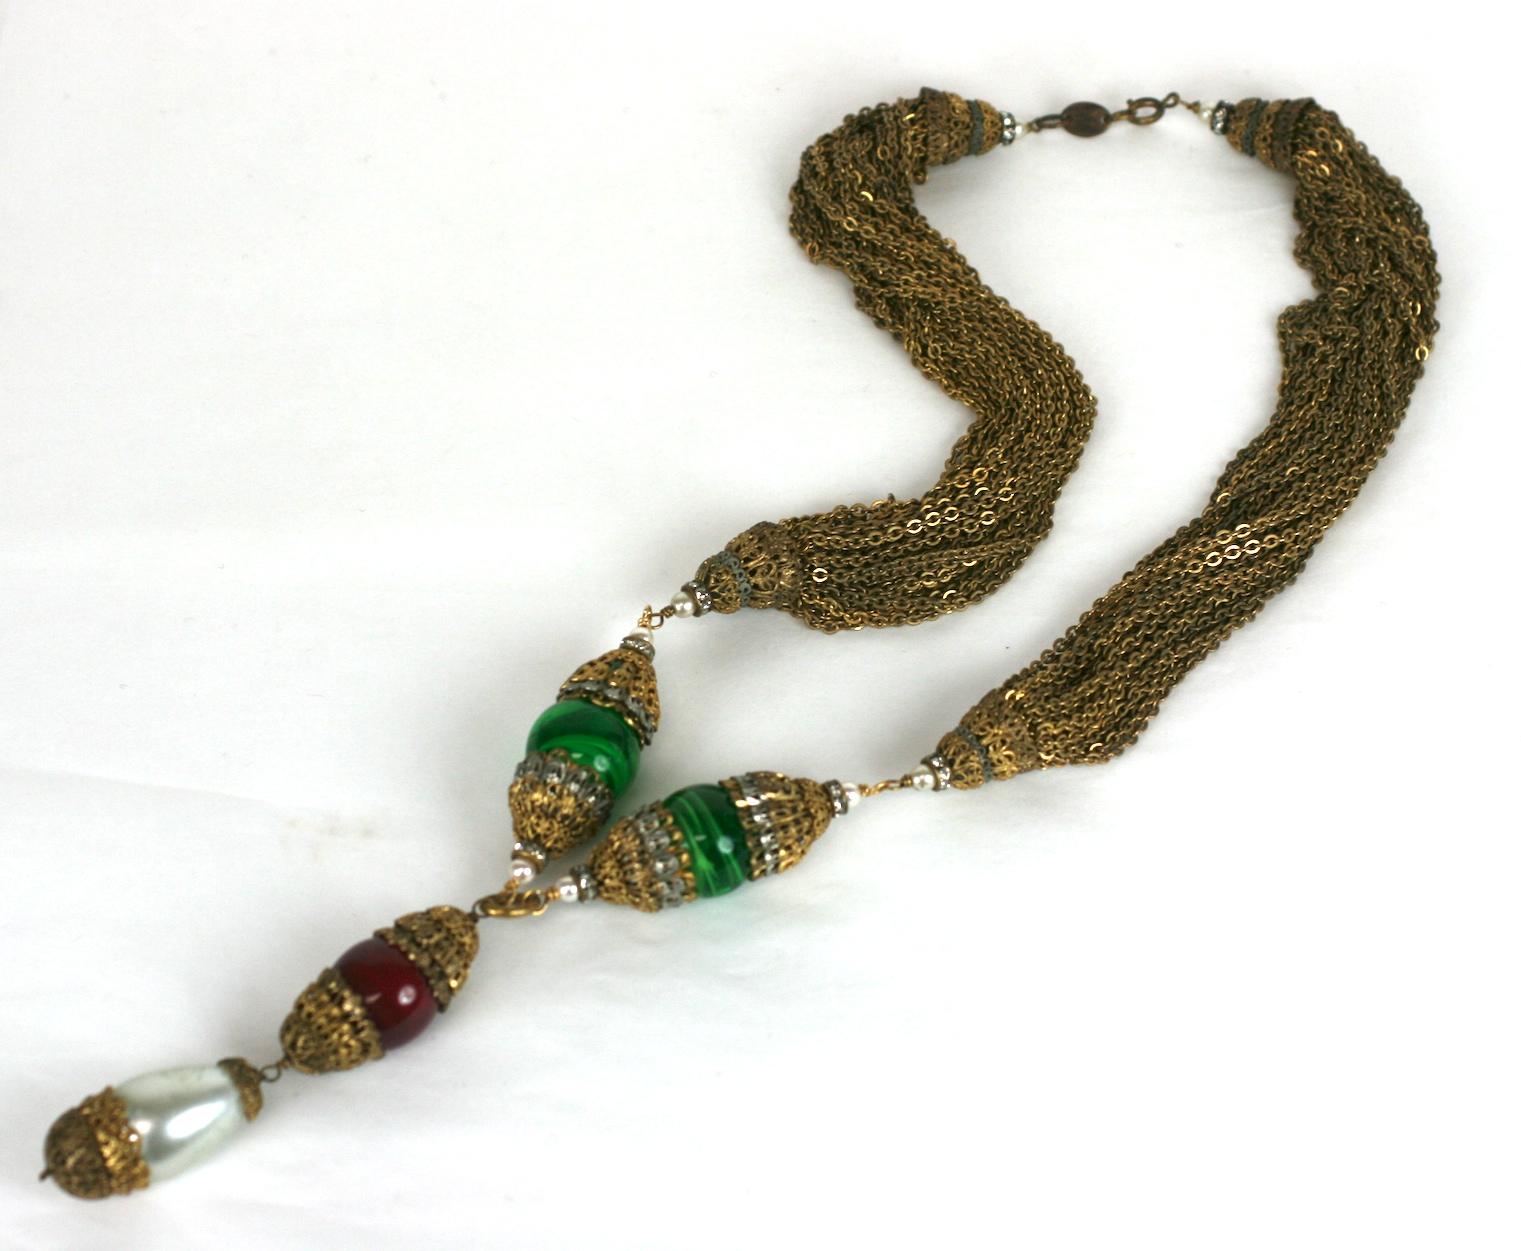 Extraordinary, early Coco Chanel Haute Couture Sautoir by Robert Goossens, Paris circa 1960. Handmade pate de verre beads in emerald and ruby are combined with dozens of gilt and silvered filigree caps, crystal rondels, faux pearls and multi chain